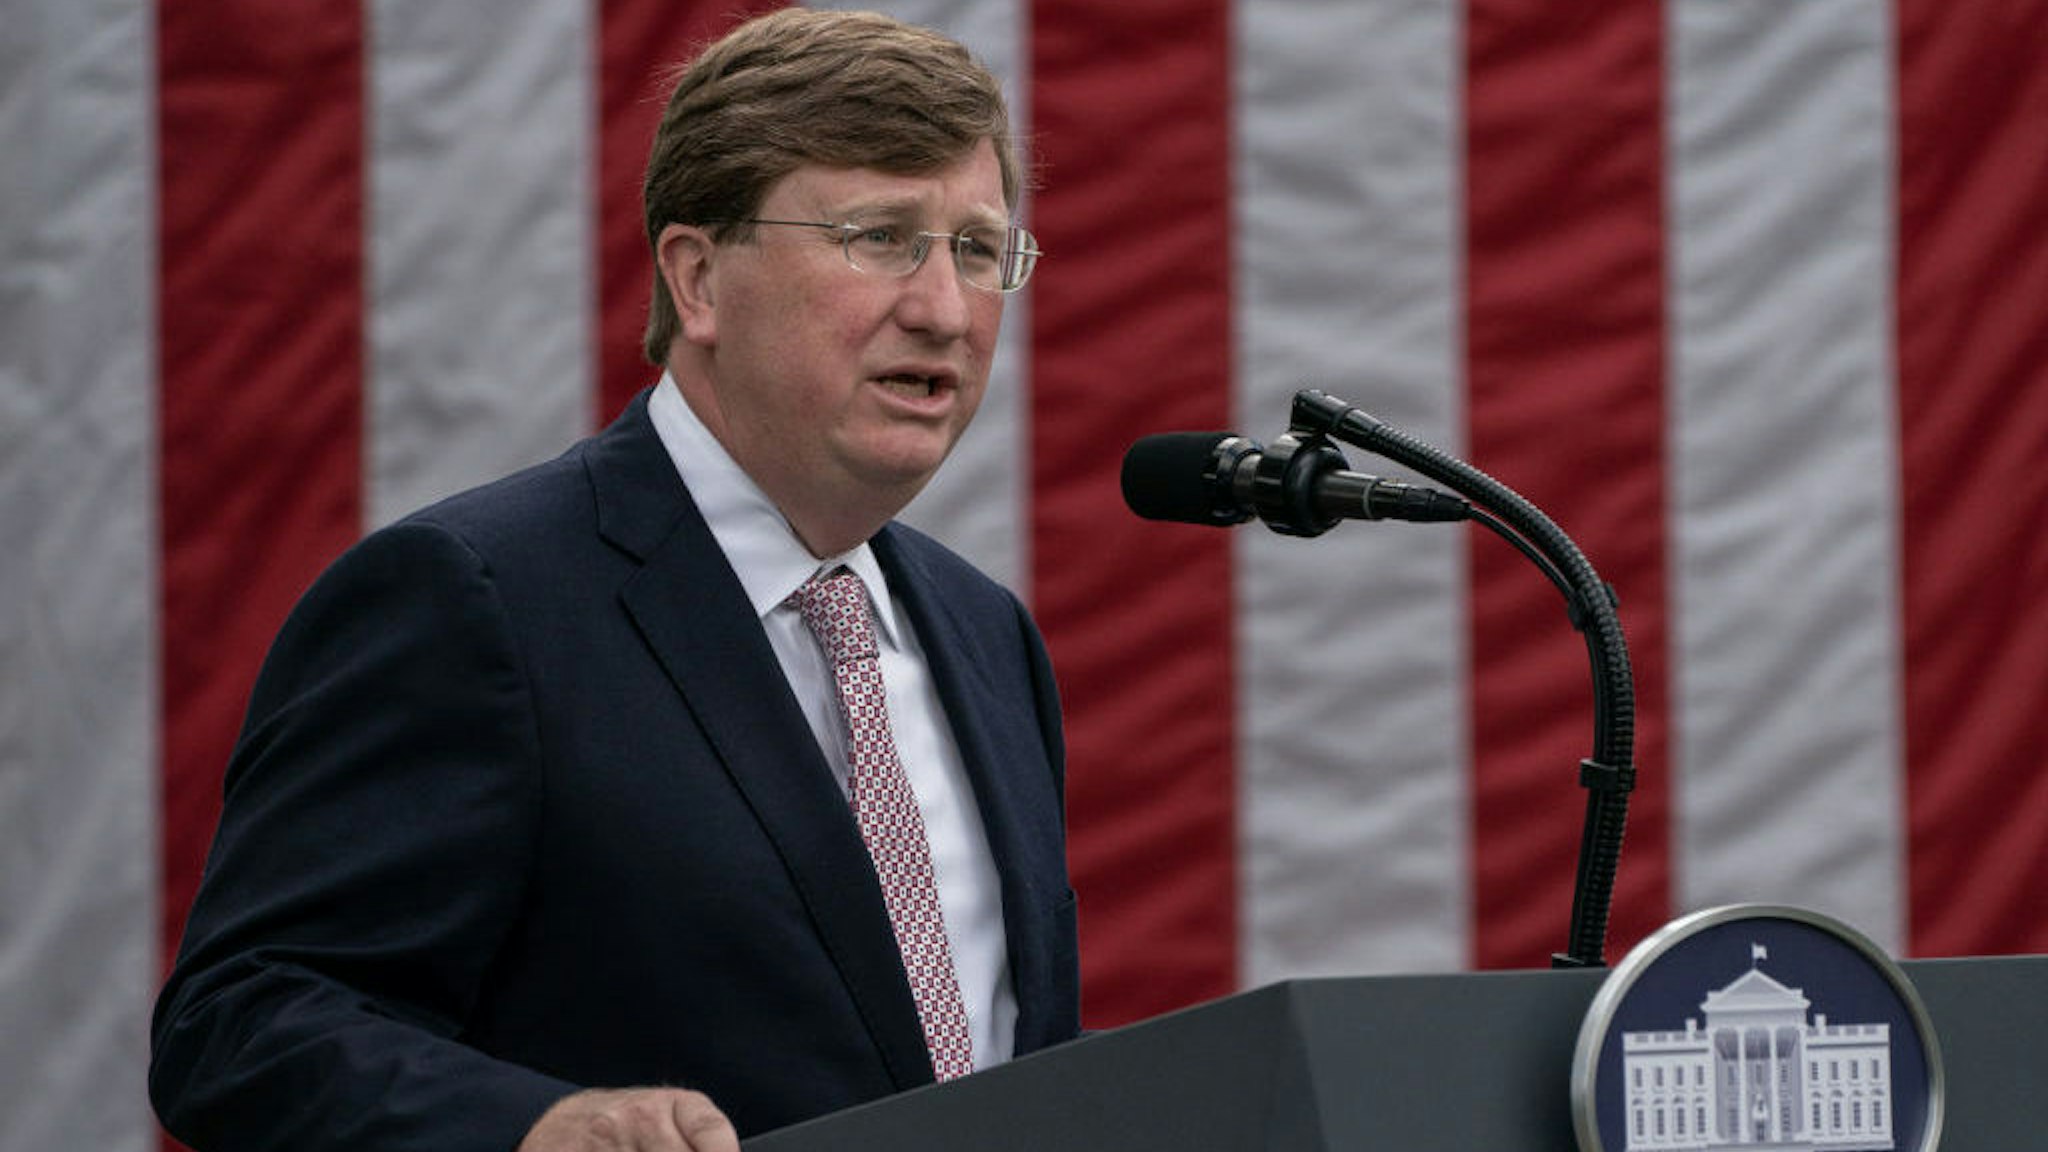 Tate Reeves, governor of Mississippi, speaks during an event in the Rose Garden of the White House in Washington, D.C., U.S., on Monday, Sept. 28, 2020. President Donald Trump is set to announce the government will send millions of rapid-result Covid-19 tests to states, and urge that they be used in schools. Photographer: Ken Cedeno/Sipa/Bloomberg